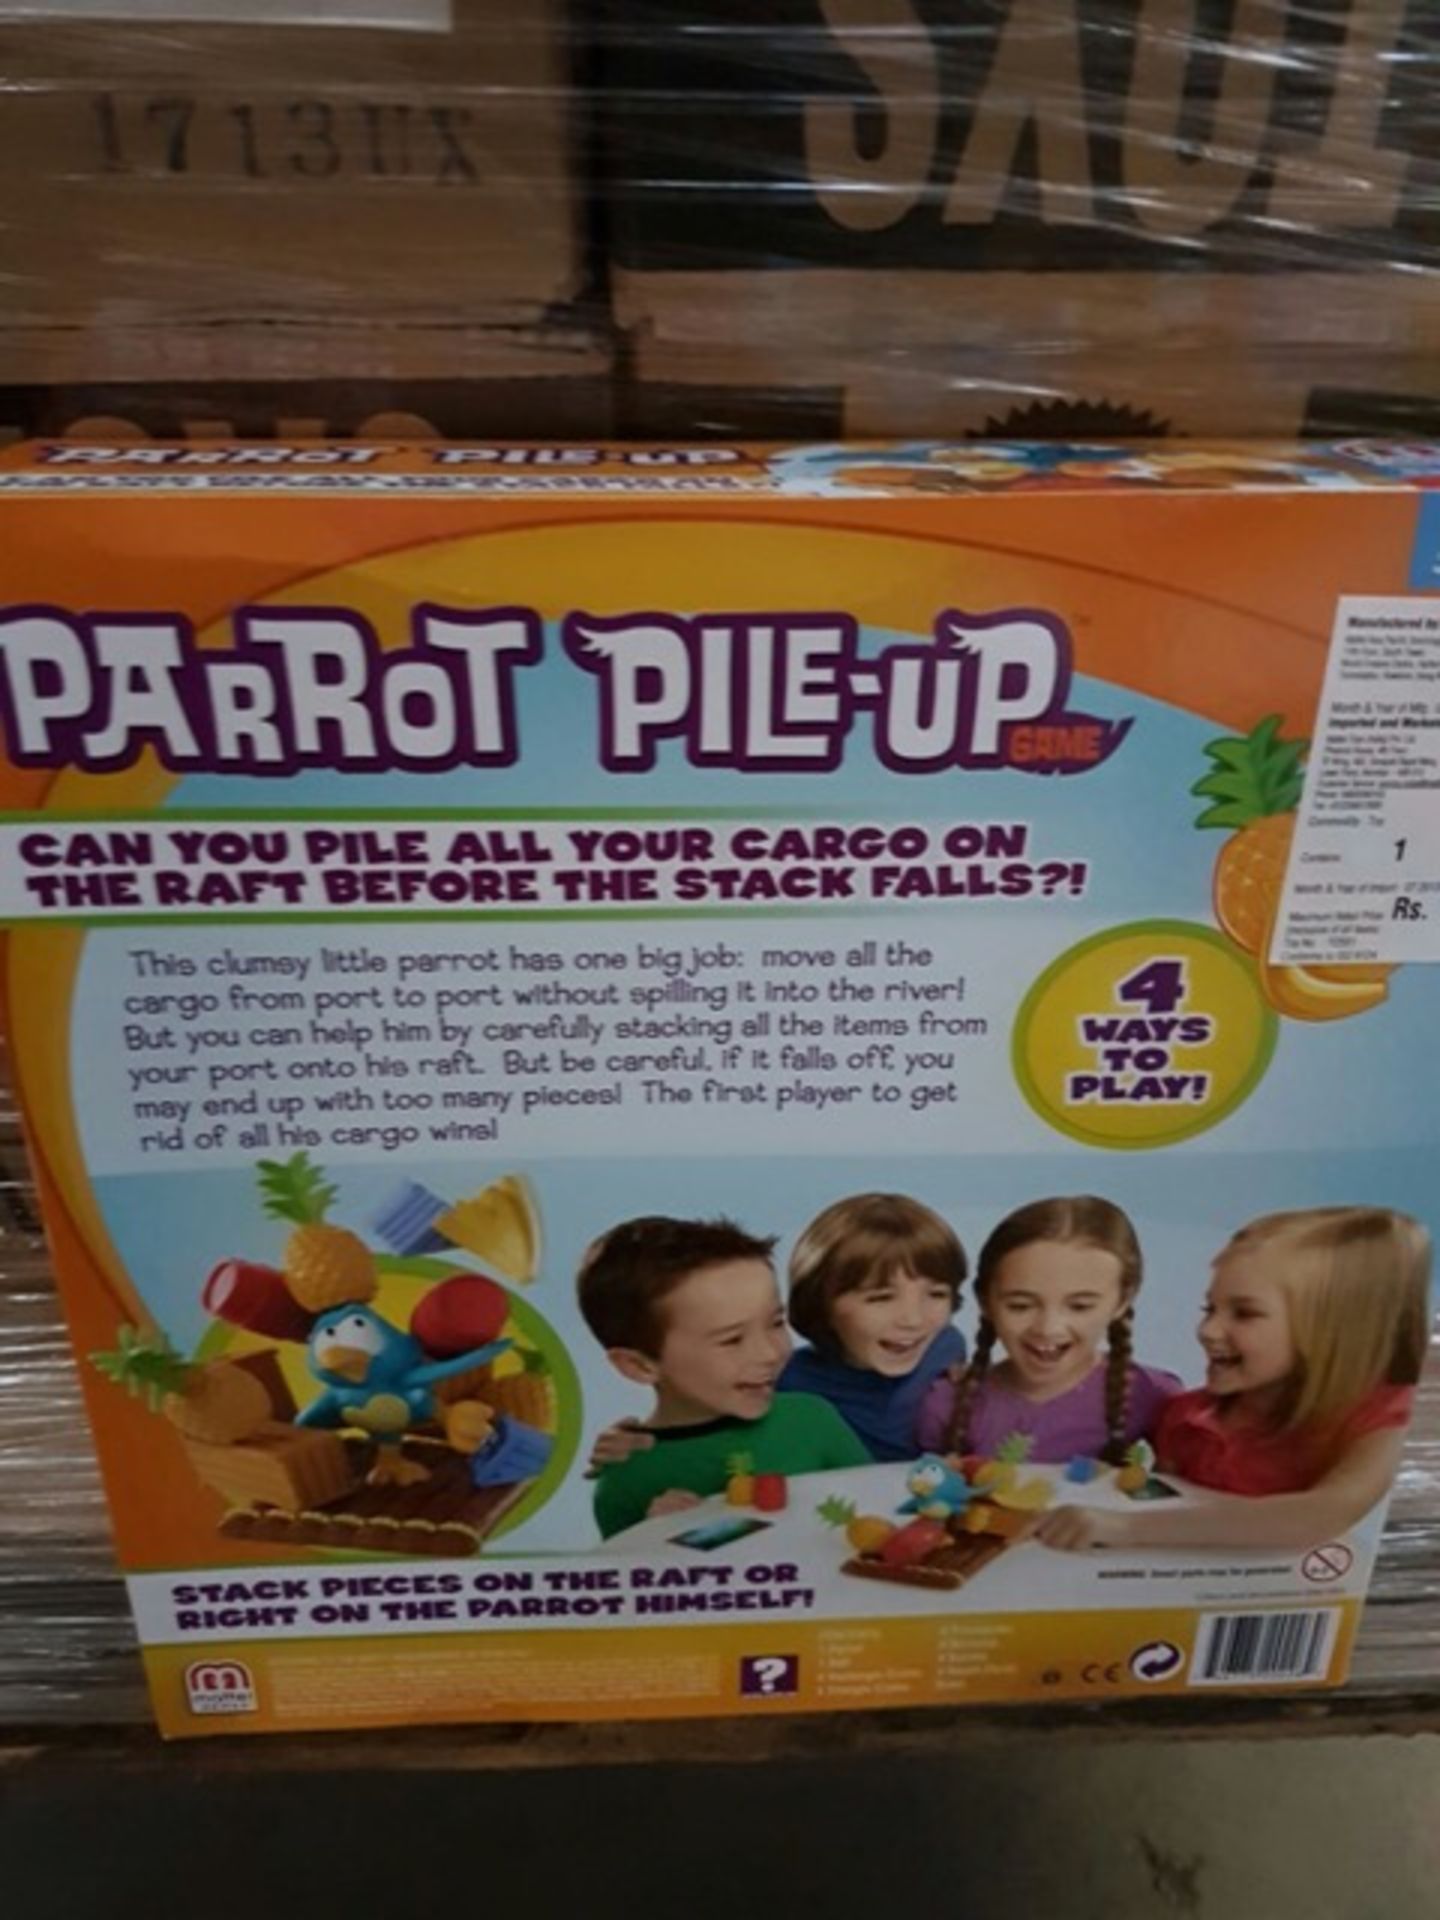 12 x Brand New Mattel Parrot Pile Up Game. - Image 2 of 2